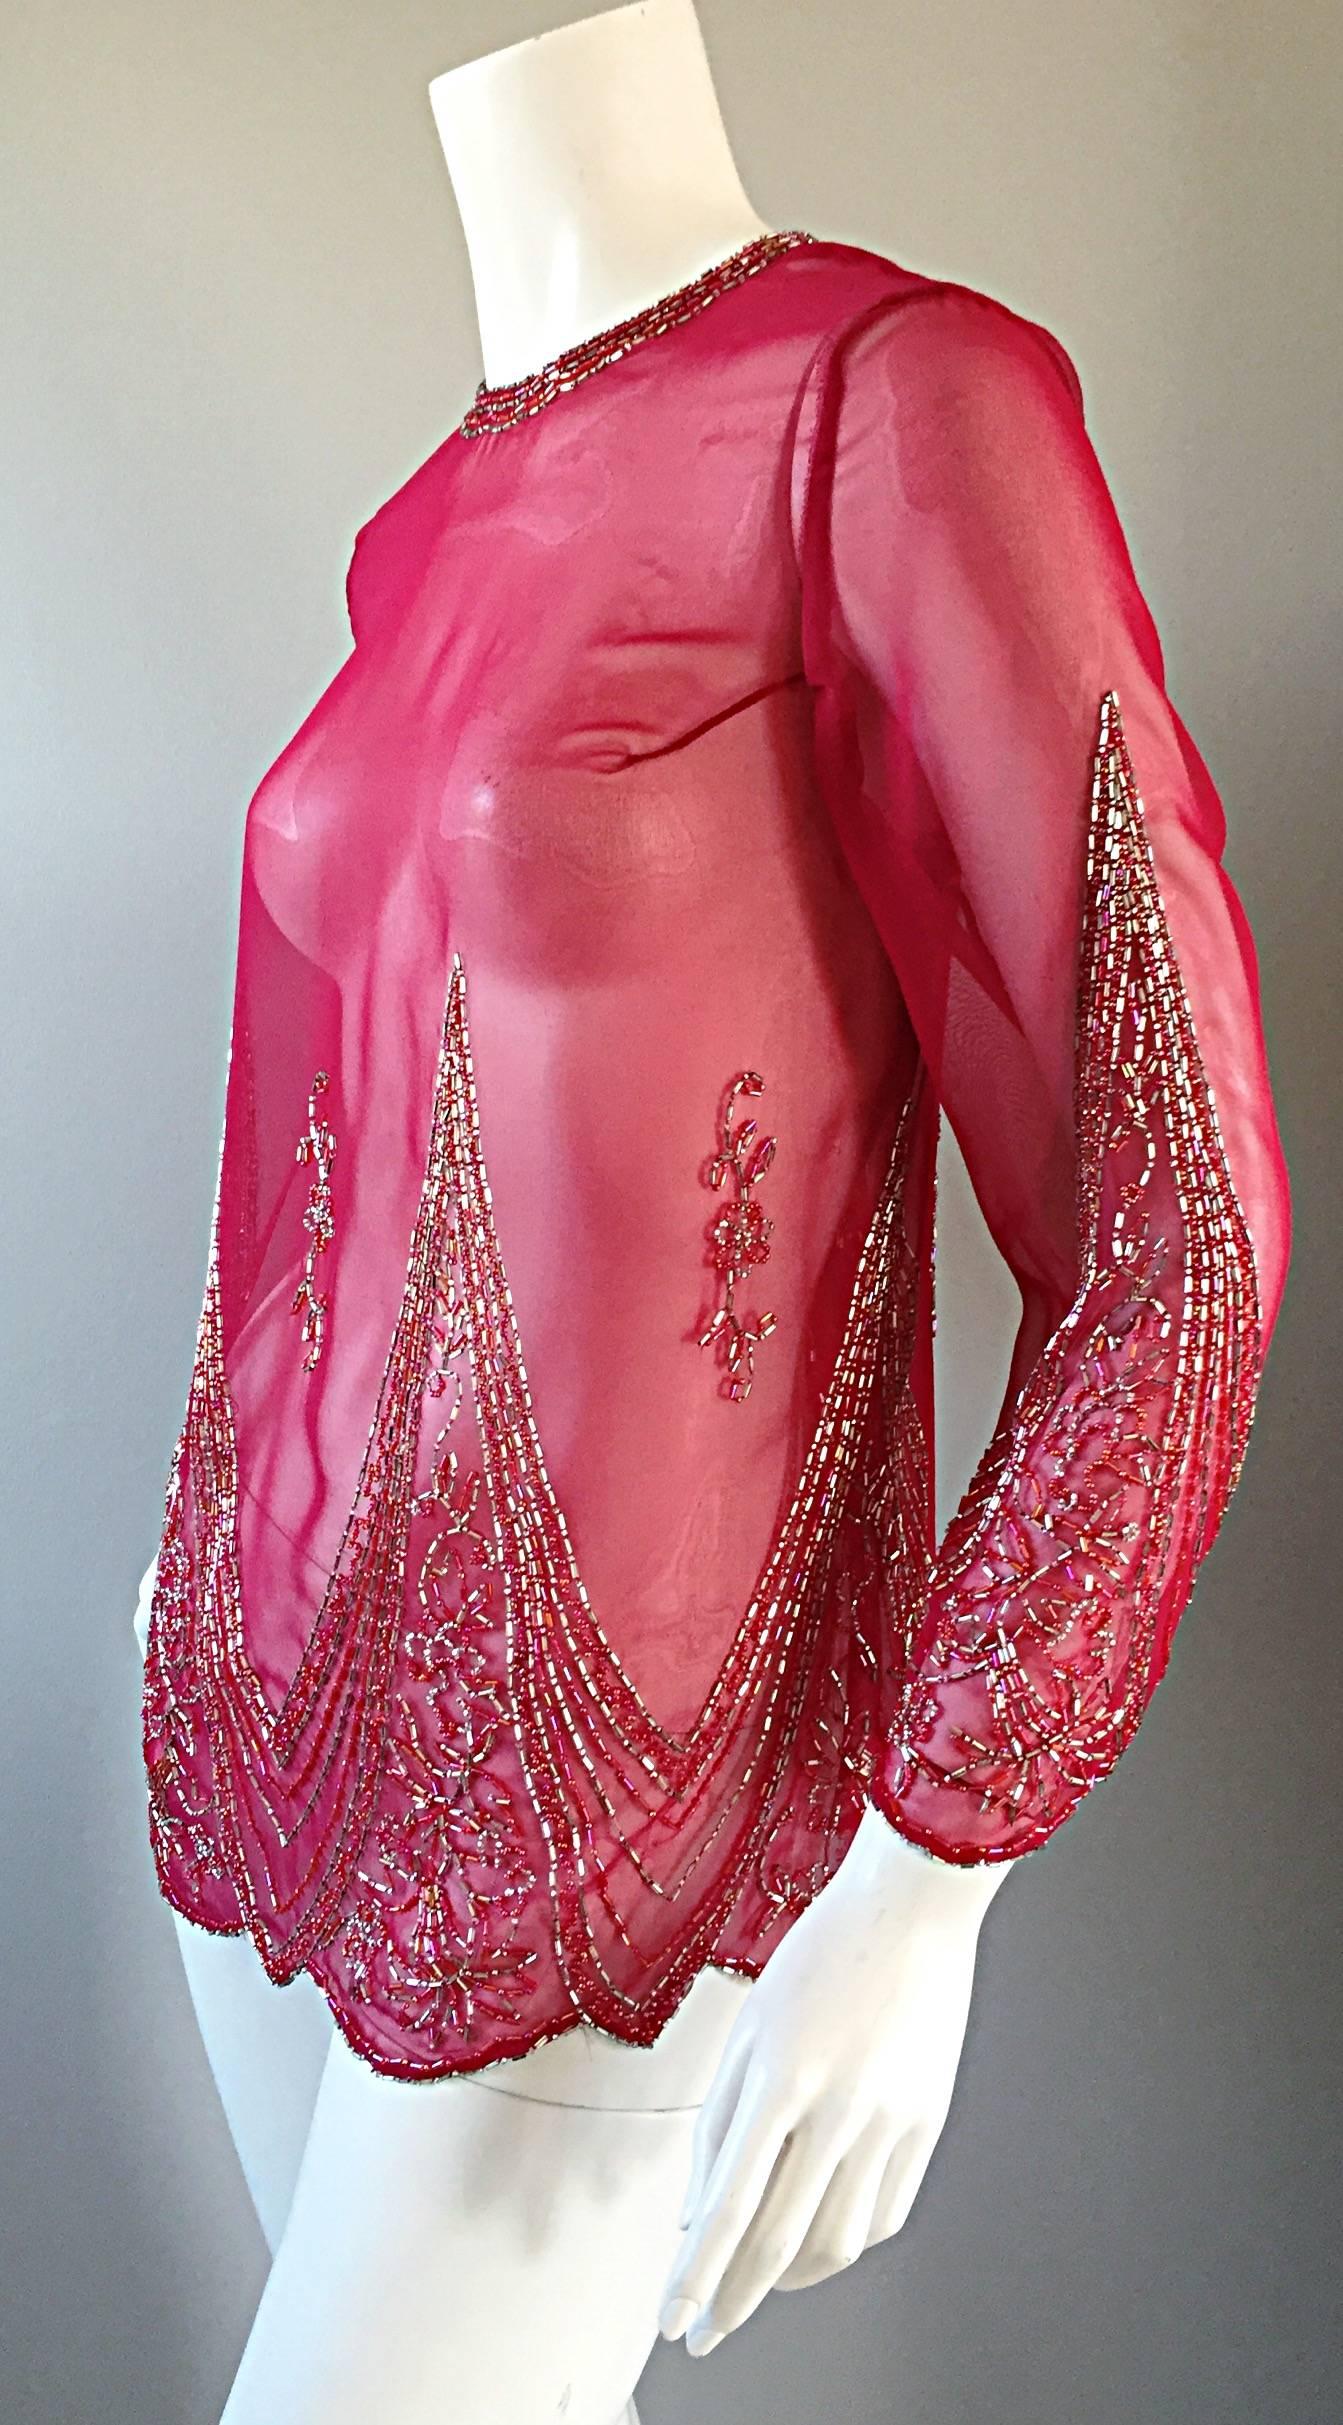 Beautiful vintage chiffon beaded tunic blouse! Stunning raspberry pink color, encrusted with hundreds of glass beads throughout. Intricate detail, with outstanding workmanship! Perfect over a tank, bra, or swimsuit. Can easily transition from day to